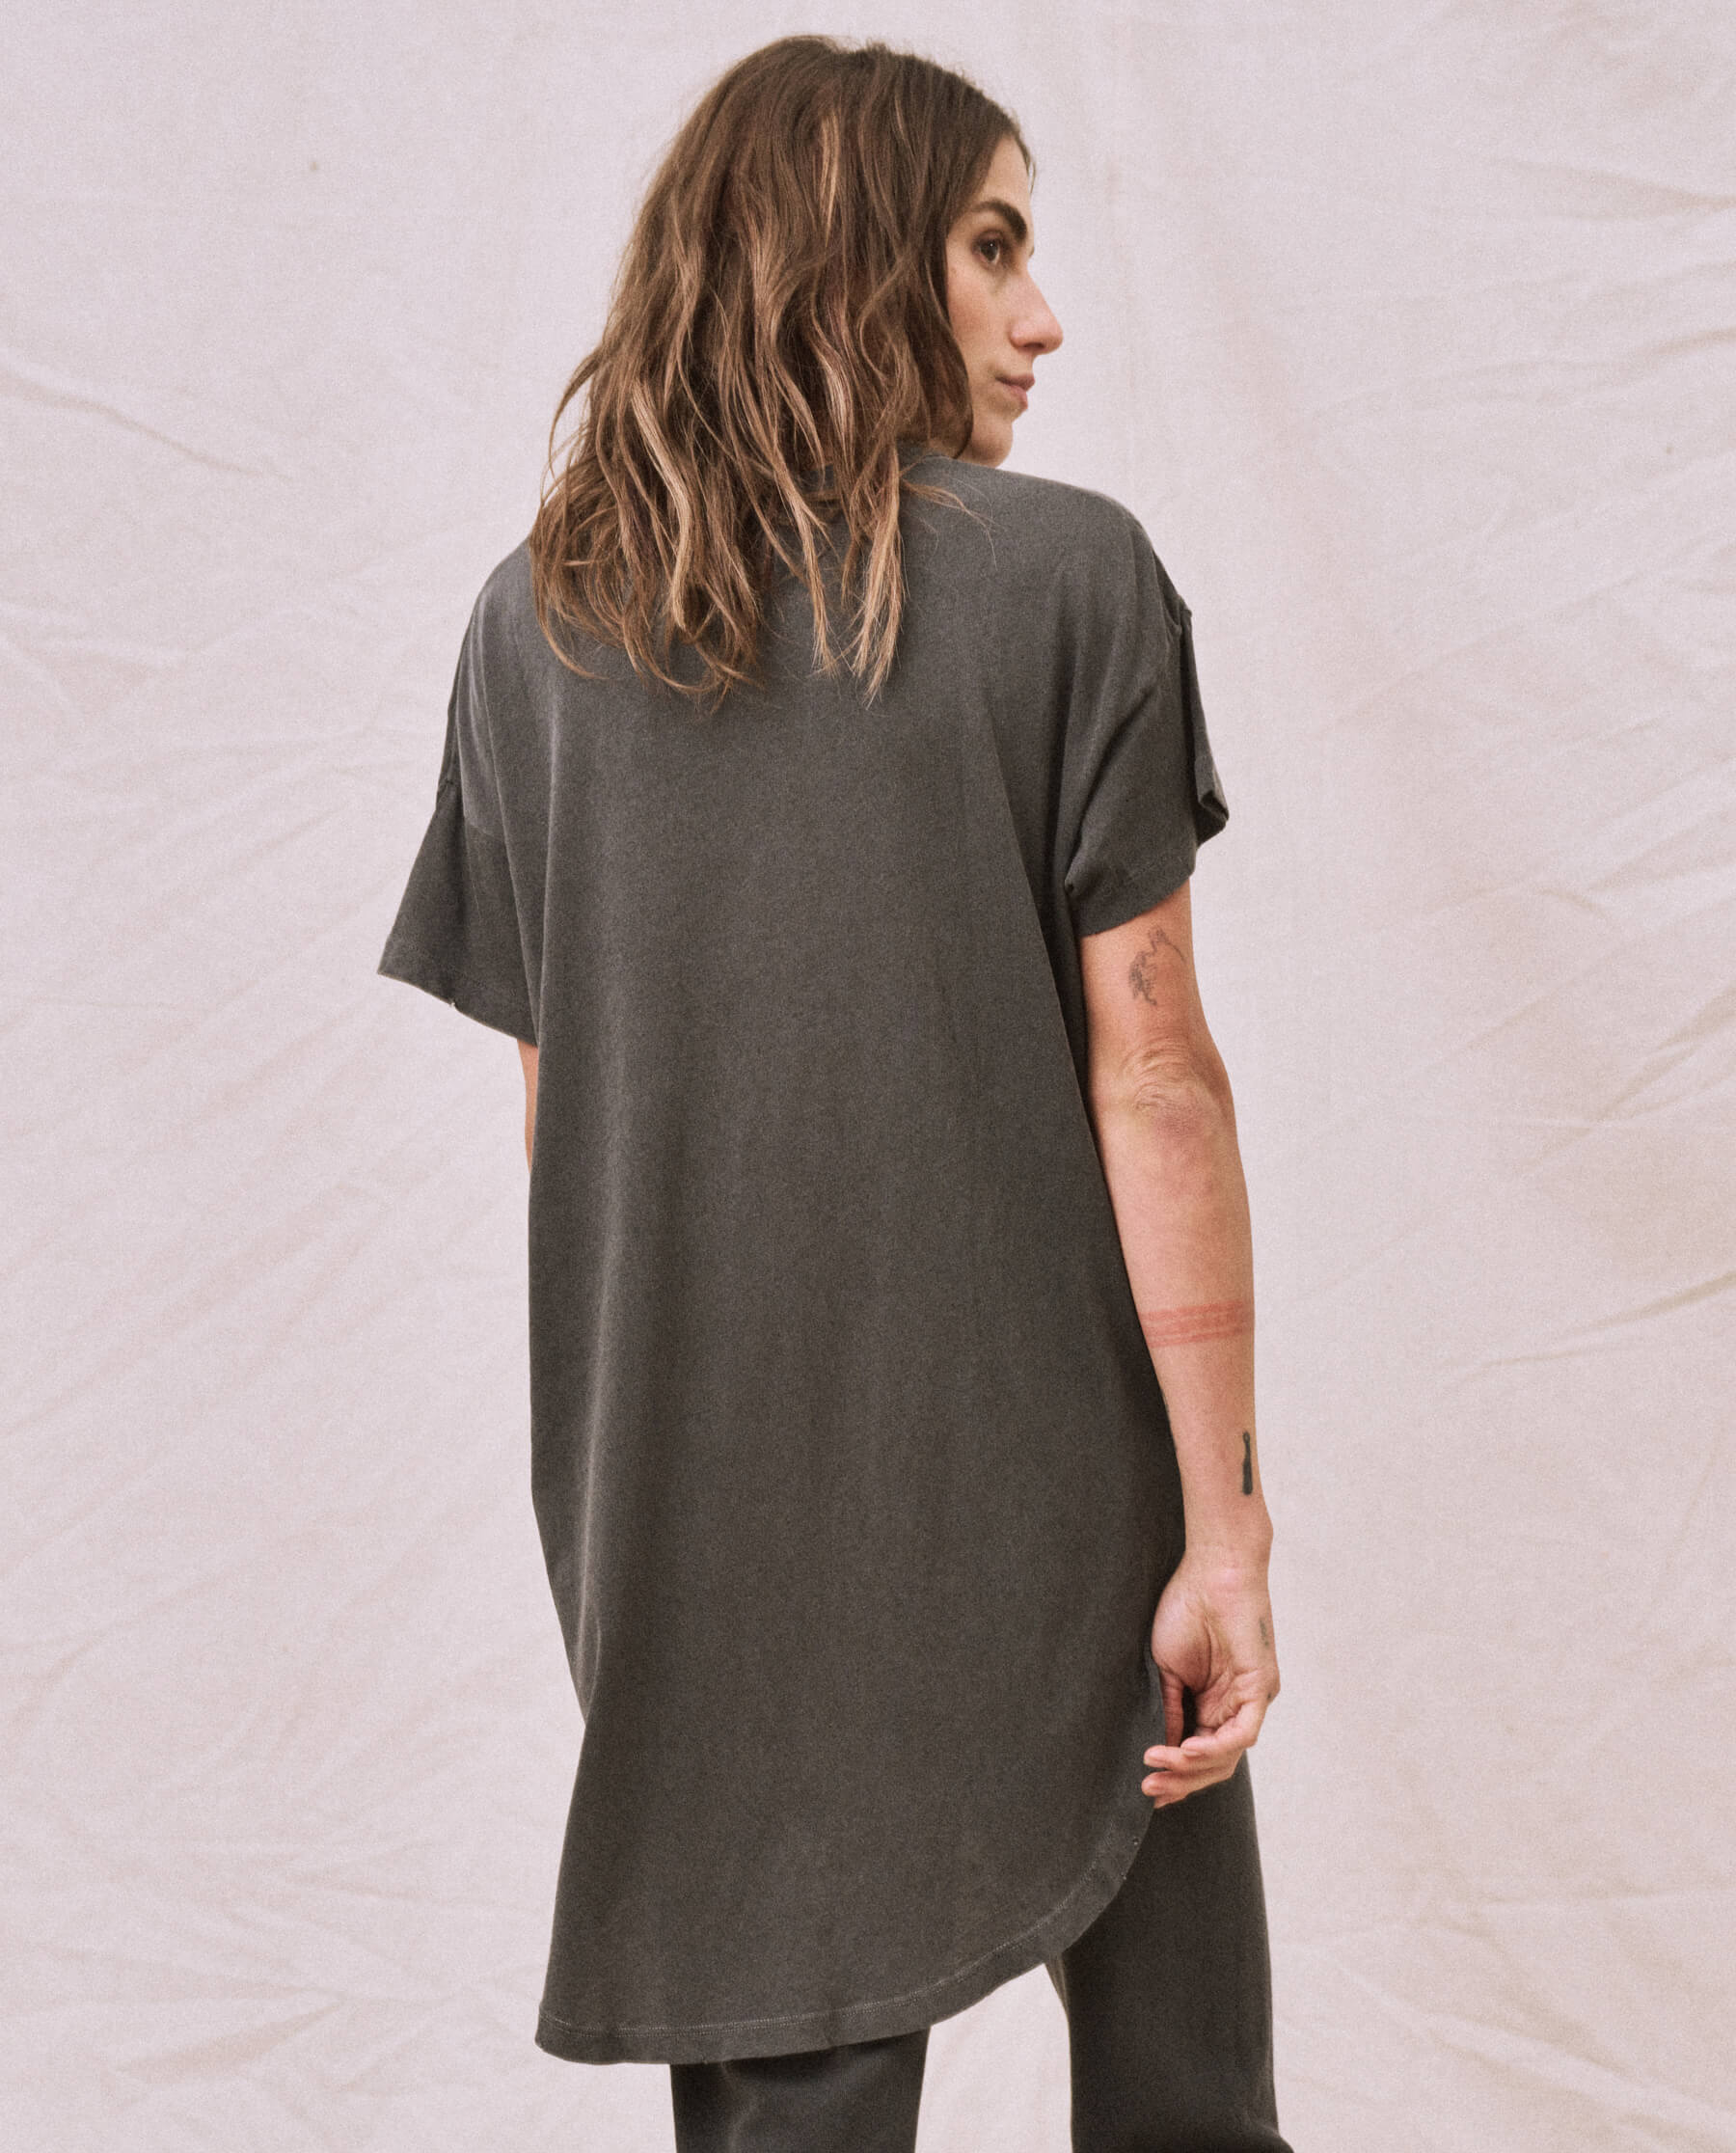 The Shirttail Tee. -- Washed Black TEES THE GREAT. CORE KNITS